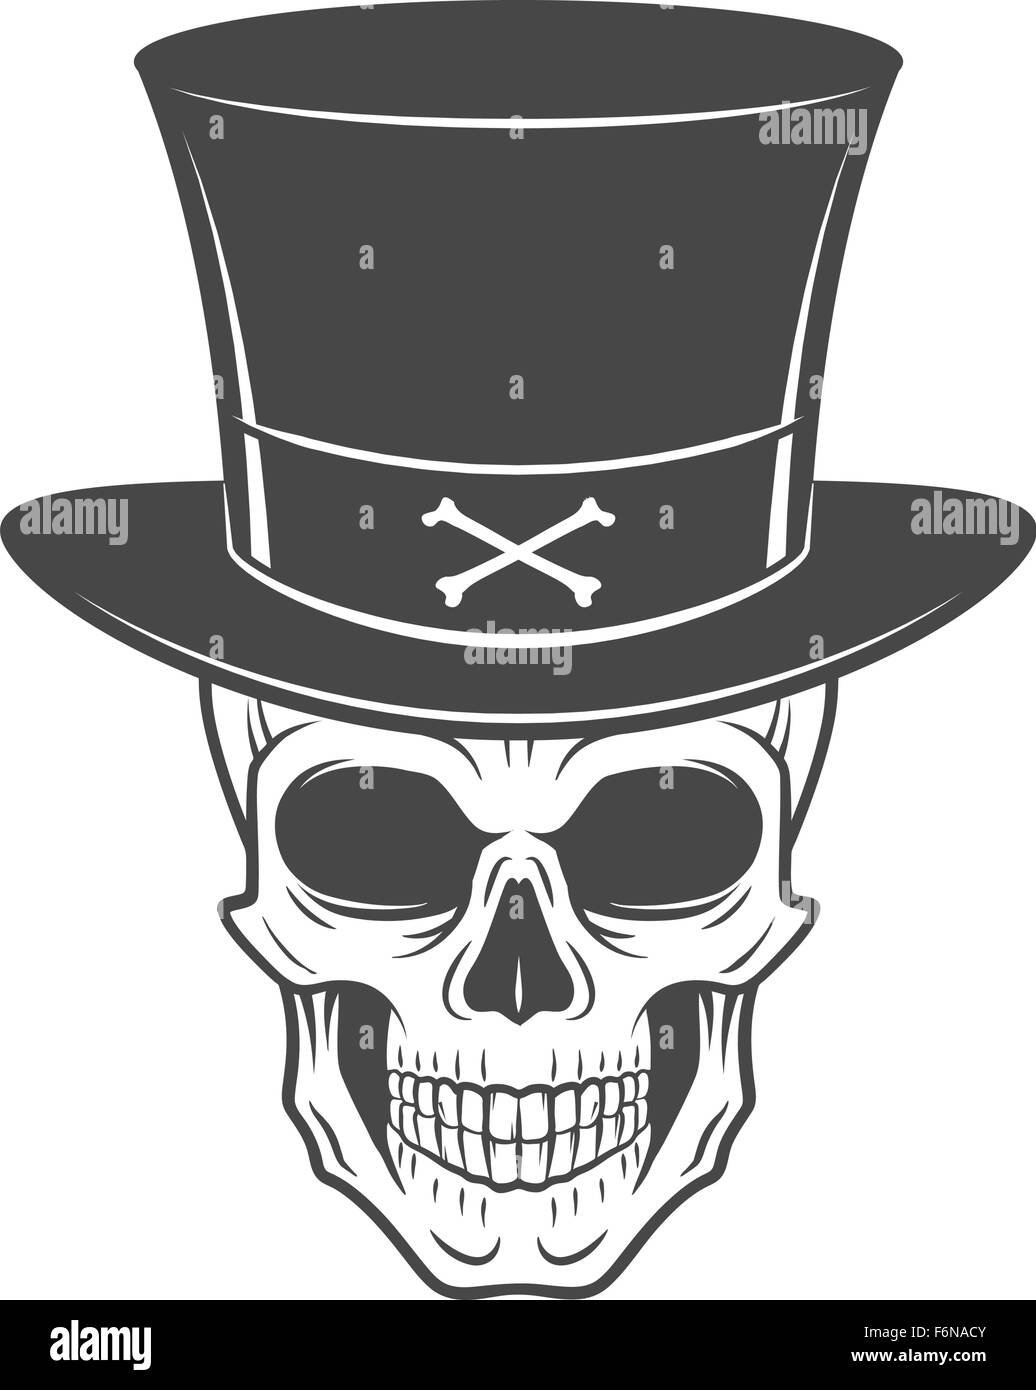 Steampunk skeleton with high hat. Smiling victorian bandit logo template. Wanted die or alive portrait. High way man t-shirt design Stock Vector